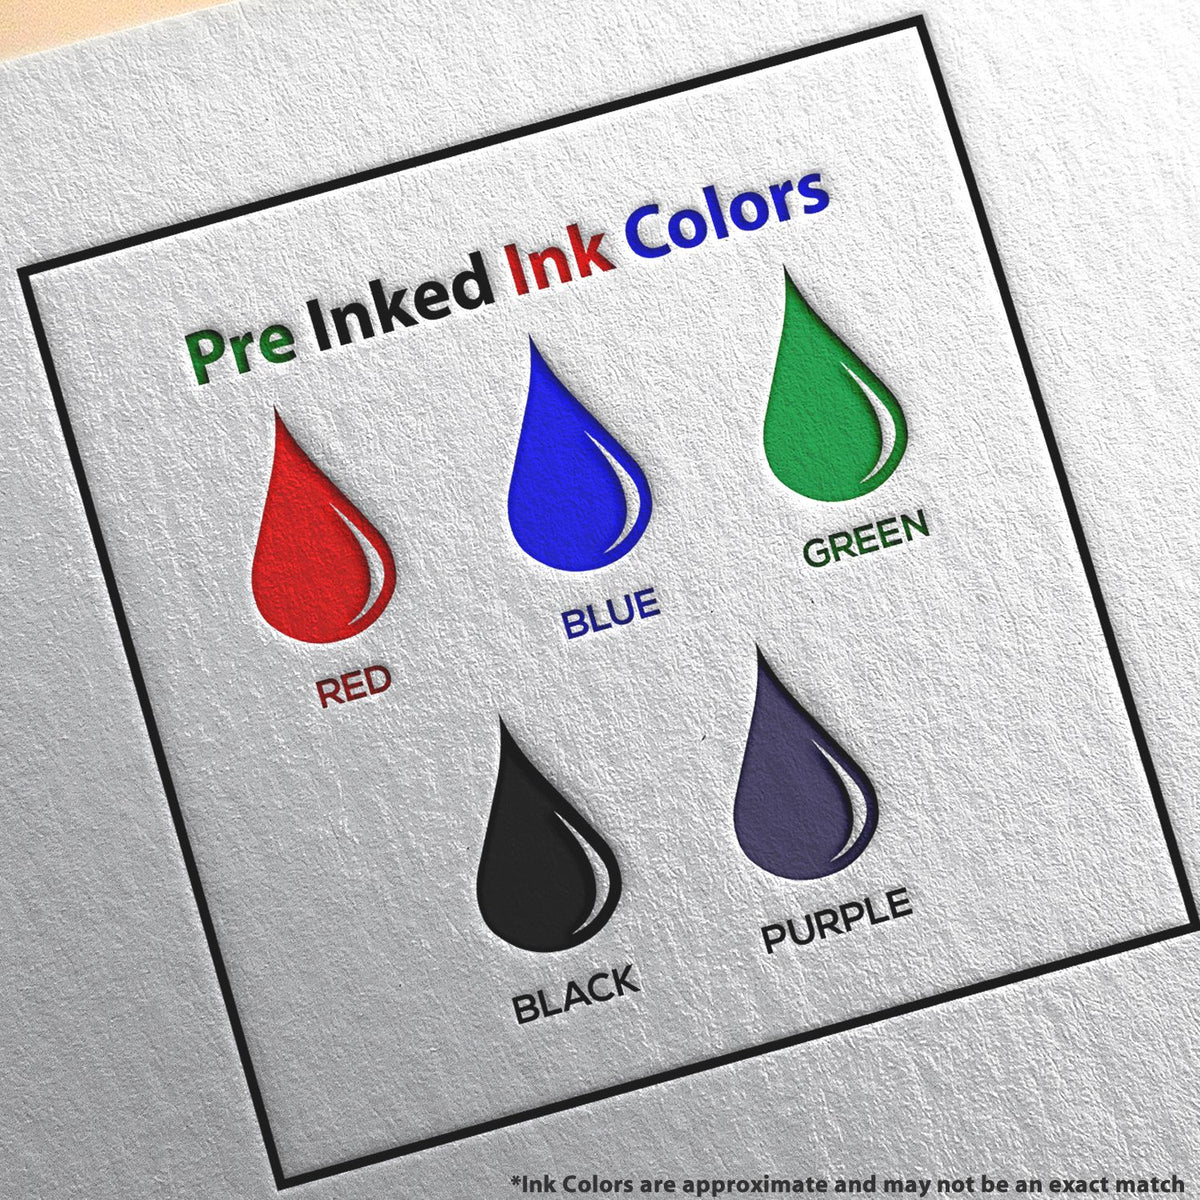 A picture showing the different ink colors or hues available for the MaxLight Premium Pre-Inked Mississippi State Seal Notarial Stamp product.